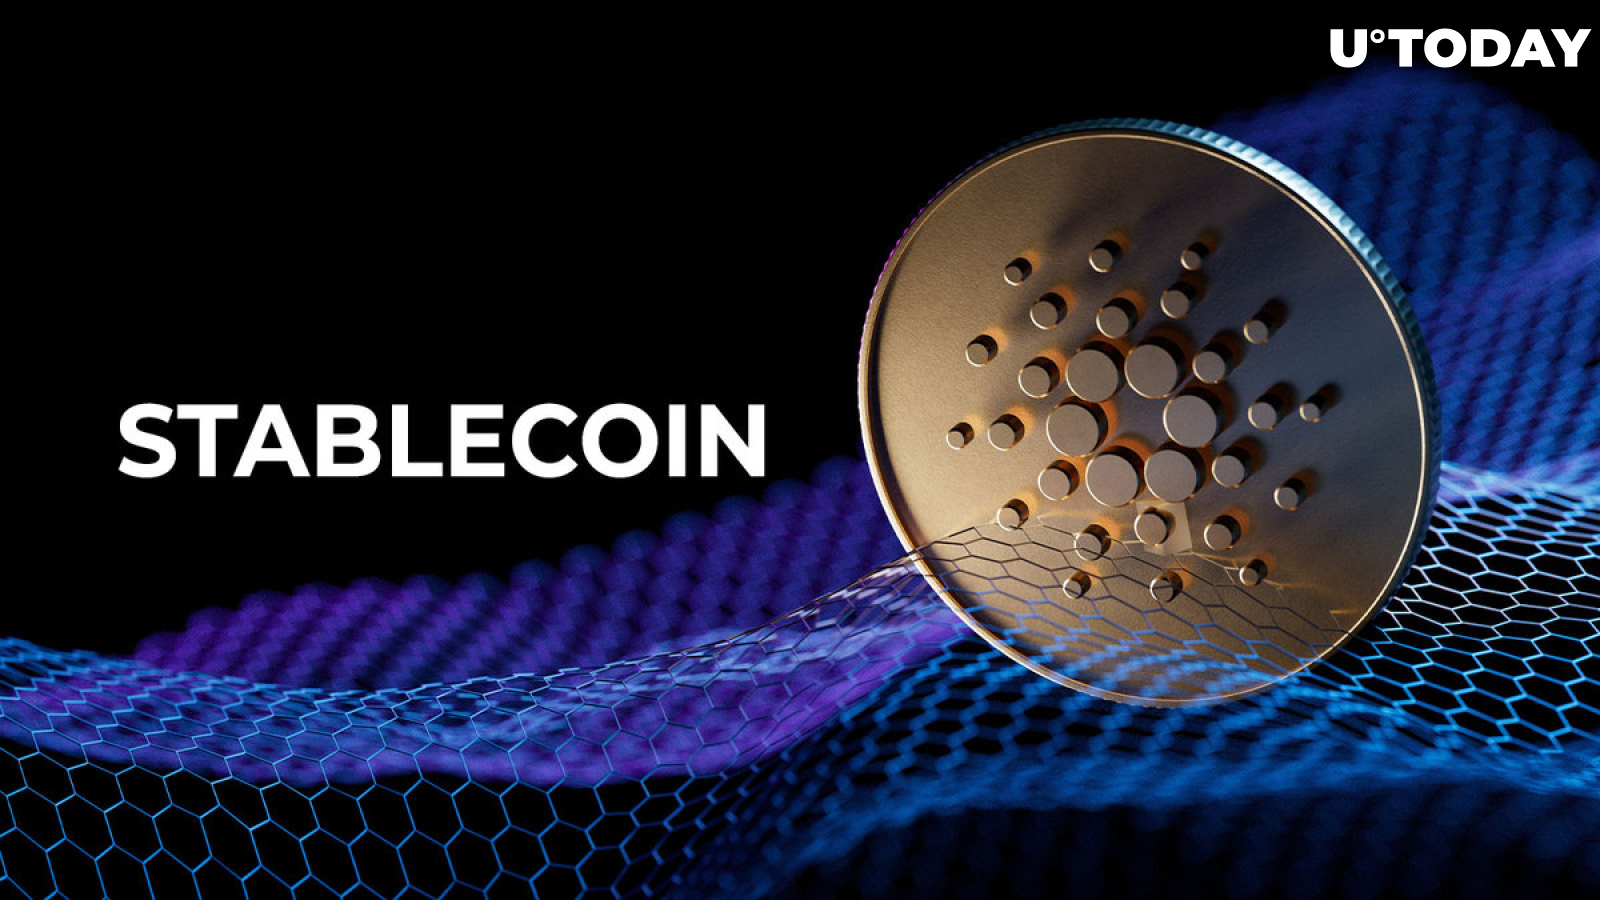 Cardano Sets New Milestone as First Stablecoin Launches